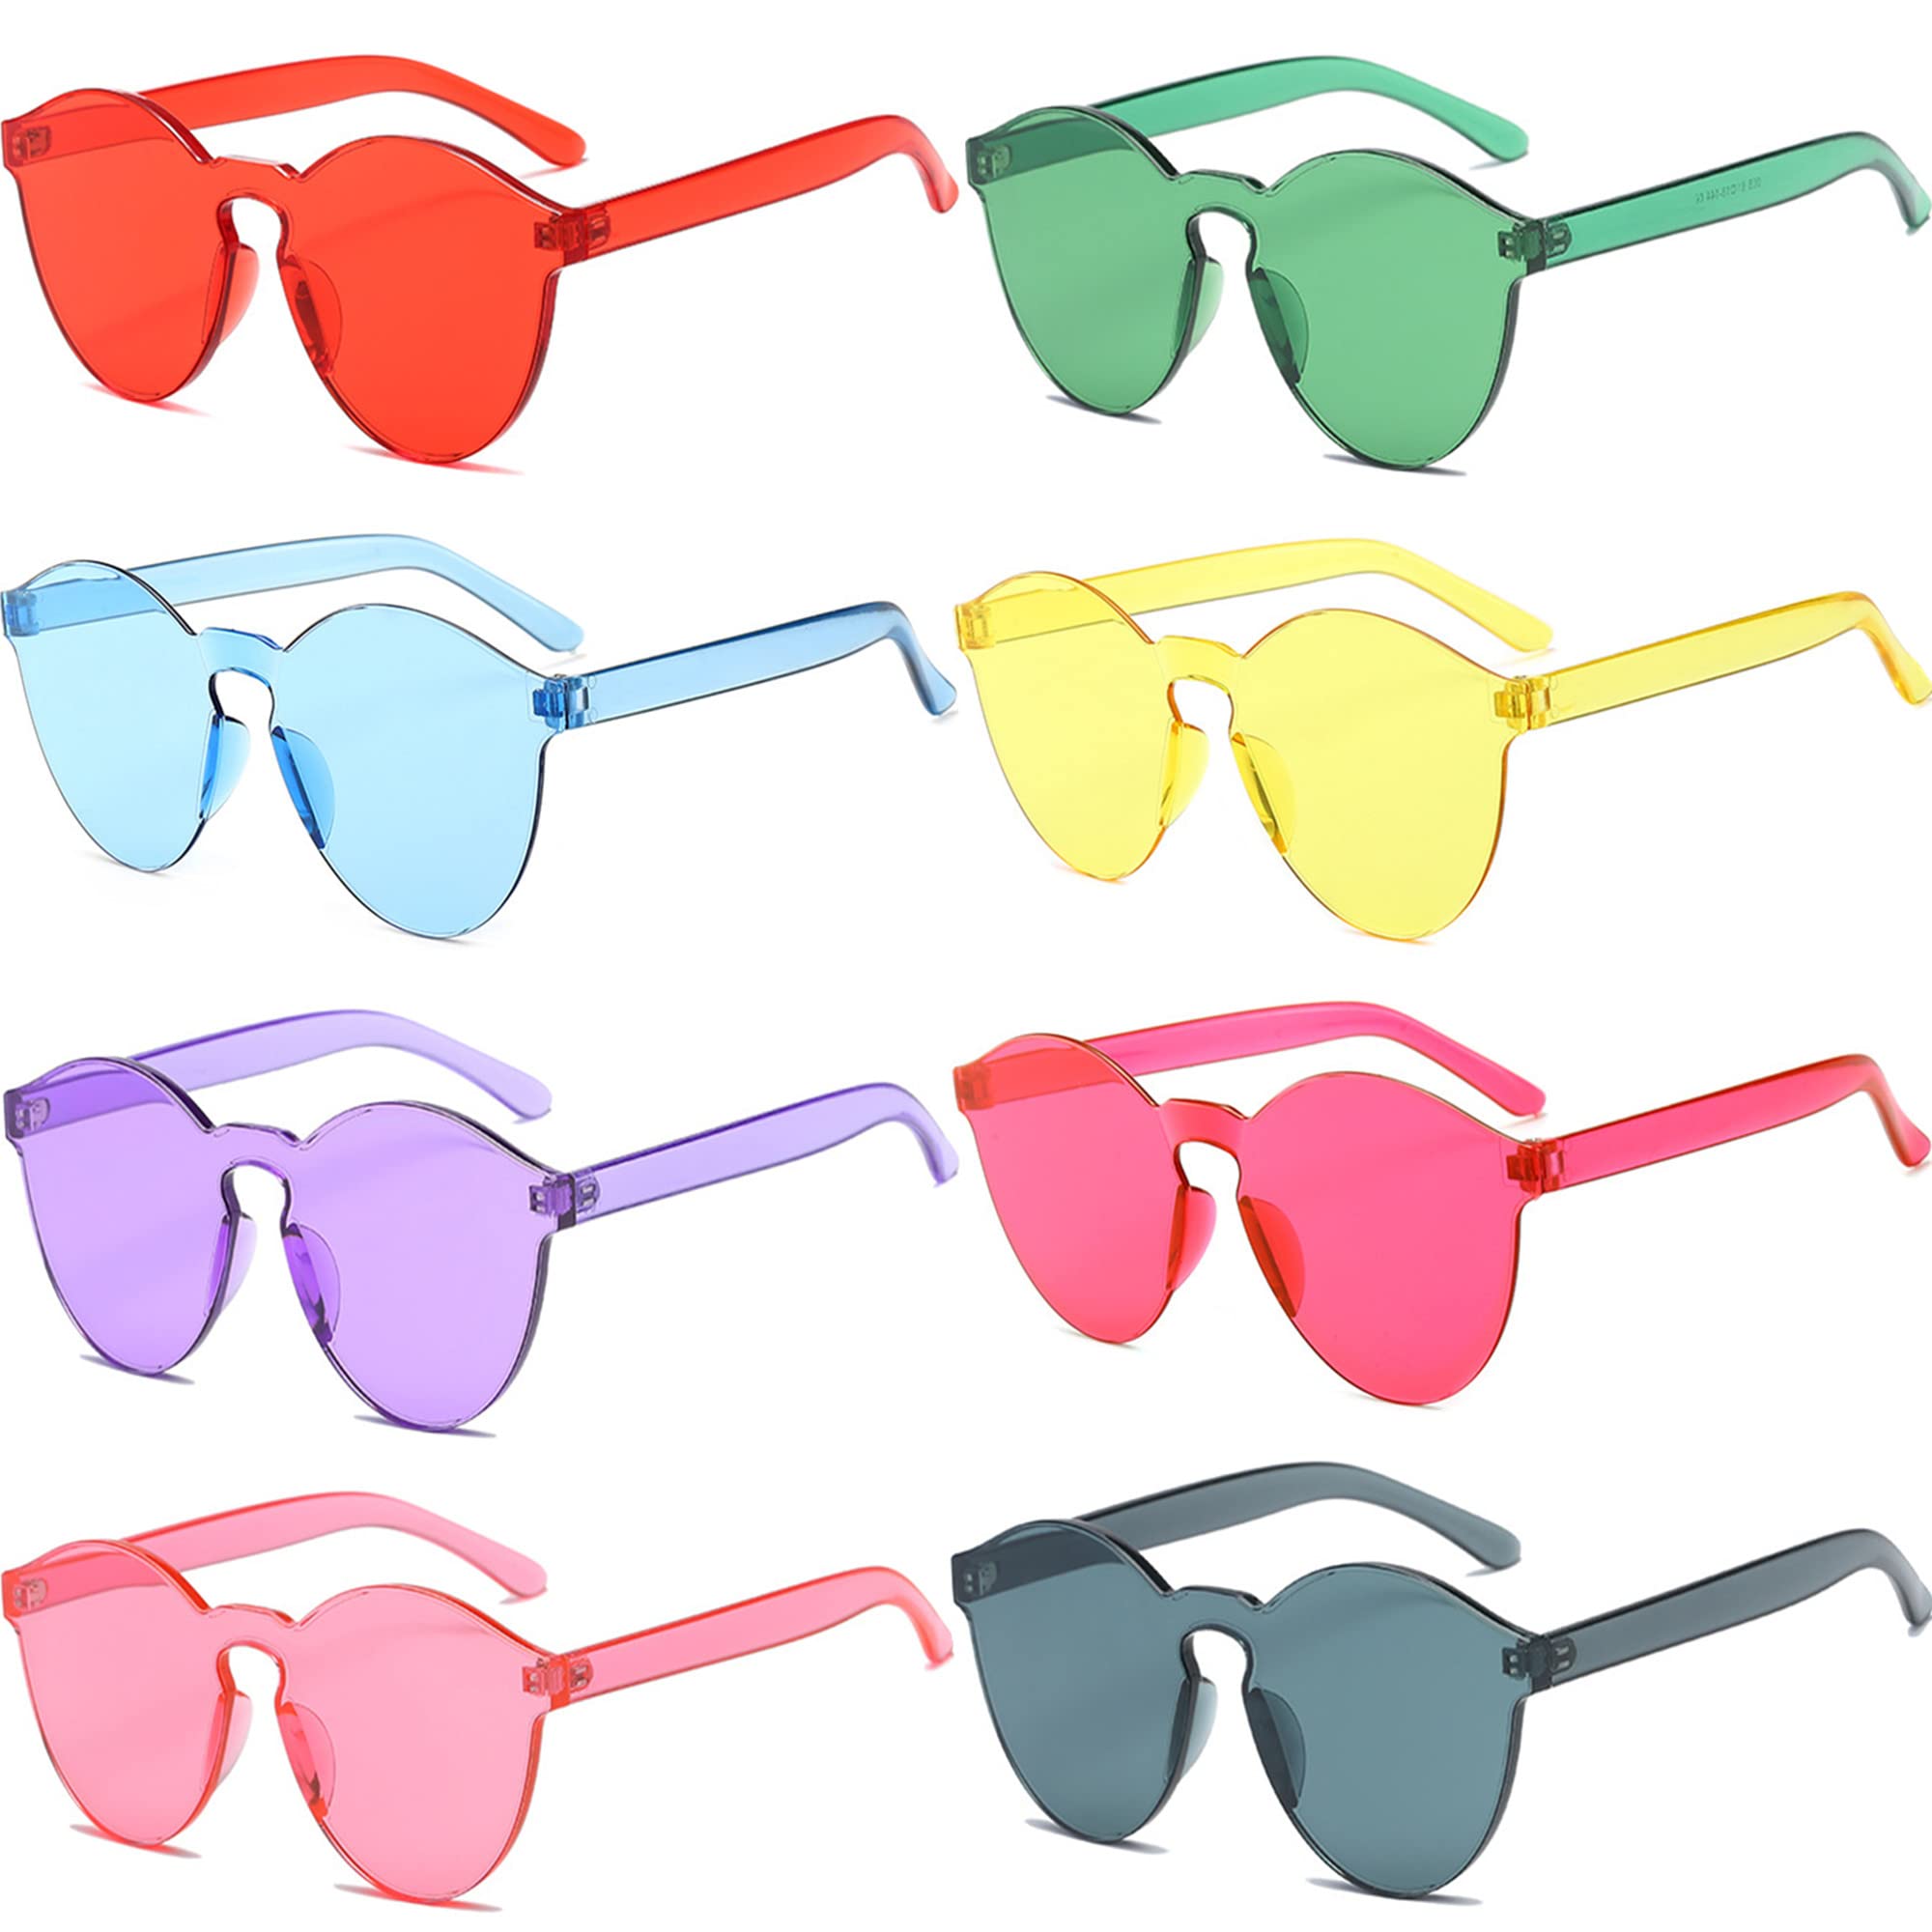 

Childrens Sunglasses Frames Heart Shaped Rimless Party Favors Frameless Glasses Tinted Eyewear Monoblock Transparent Candy Color amNaN